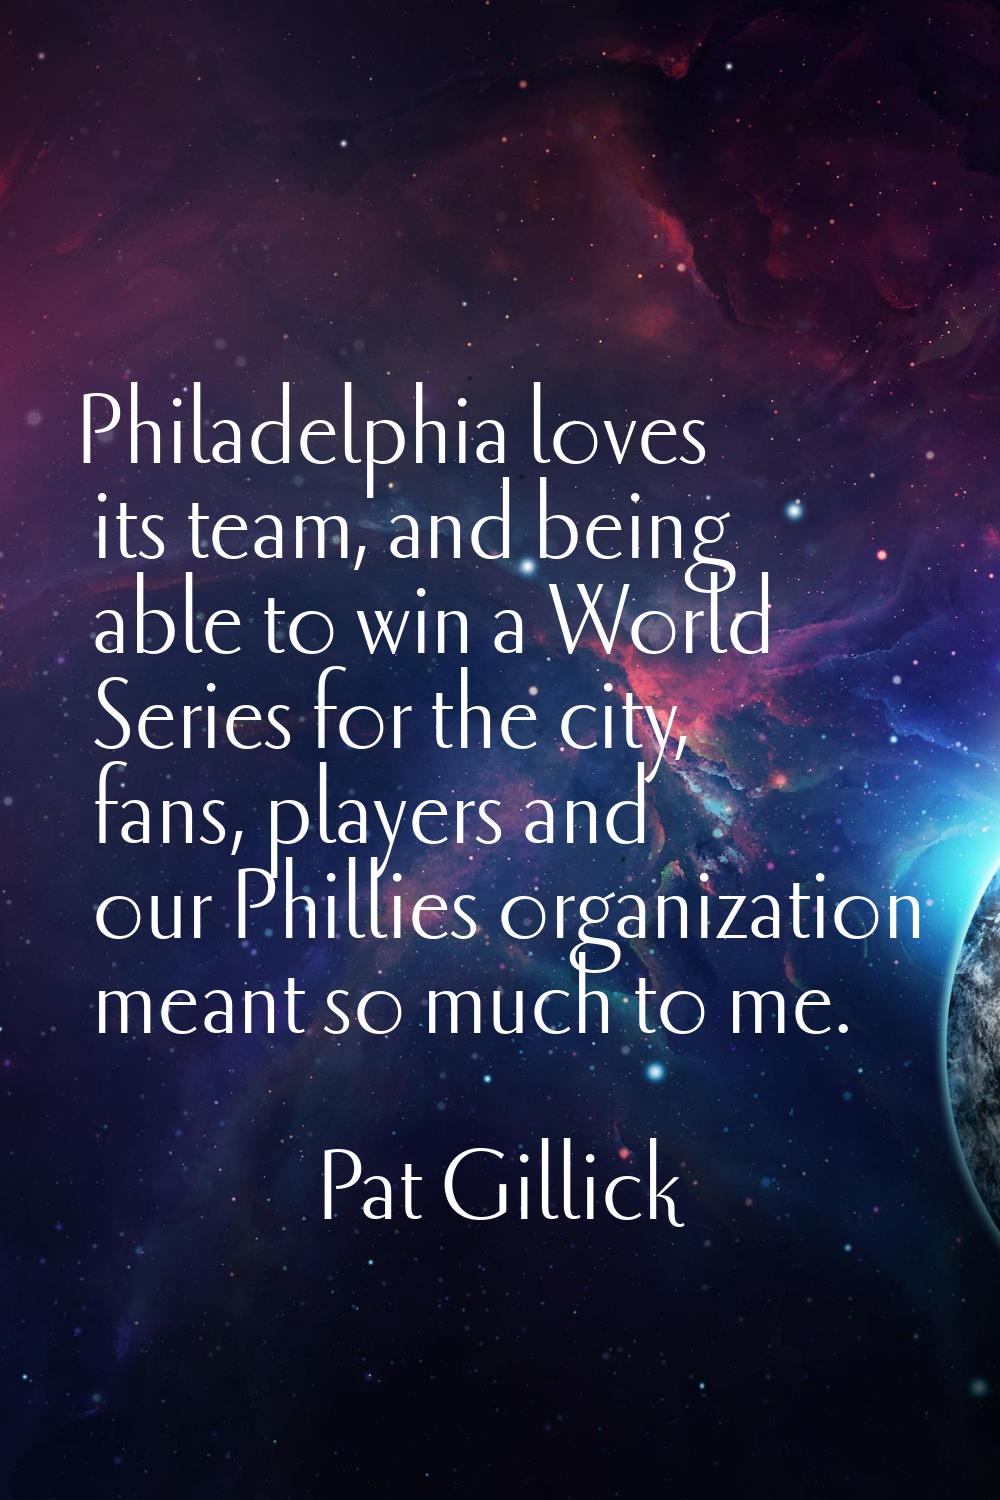 Philadelphia loves its team, and being able to win a World Series for the city, fans, players and o